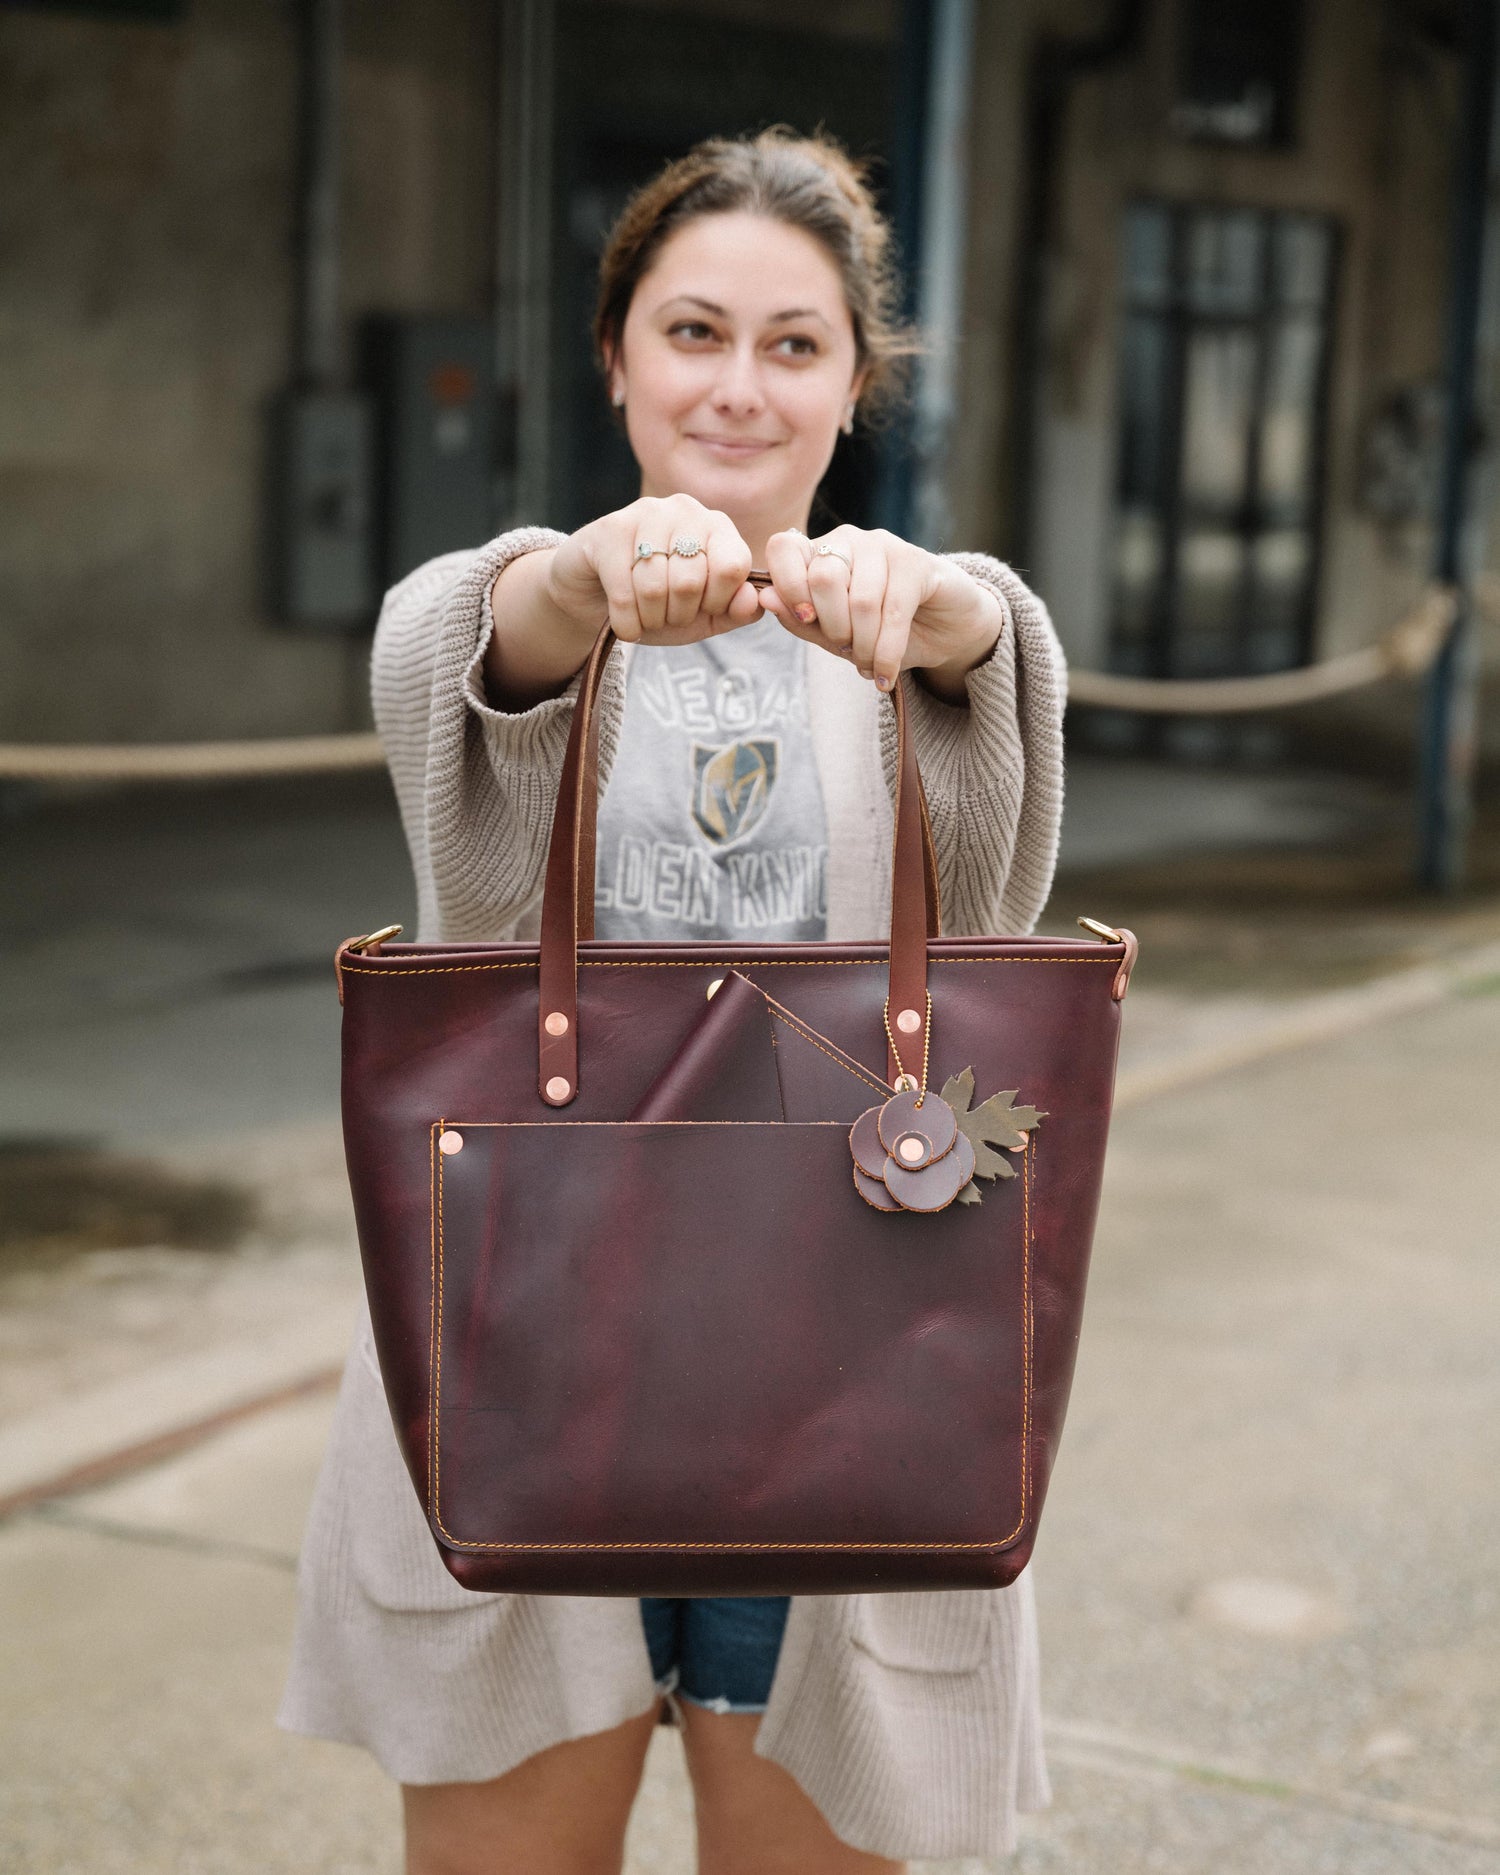 Oxblood Tote | Handmade Leather Tote Bag by KMM & Co. 11-inch +$25 / Crossbody Strap (FINAL Sale) +$65